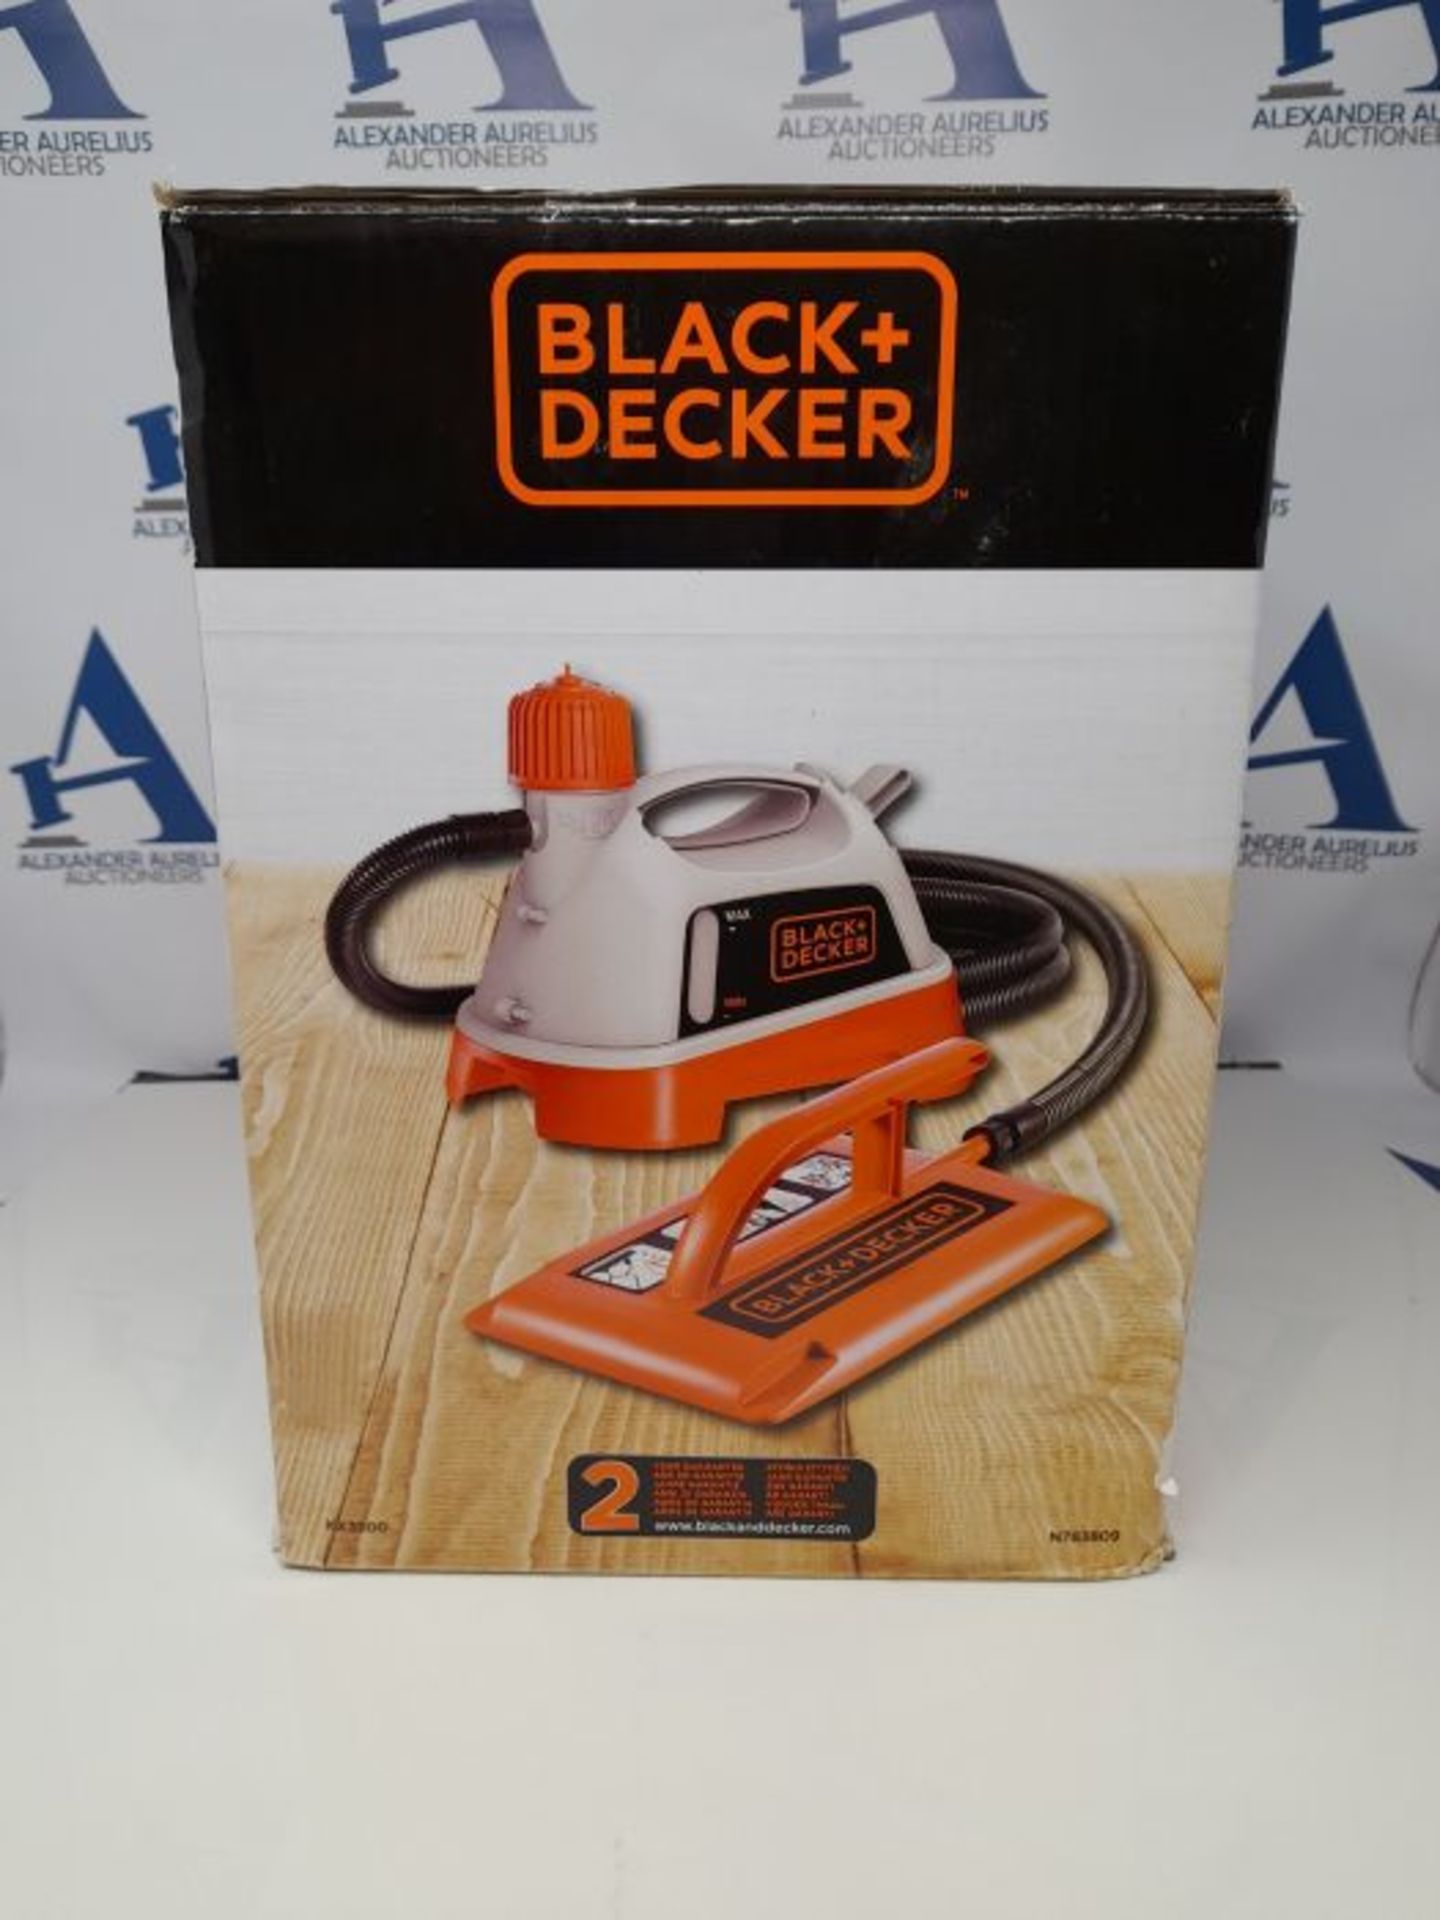 BLACK+DECKER 2400 W Wallpaper Steamer Stripper with Pad, Removes Vinyl, Multi-Layered, - Image 3 of 3